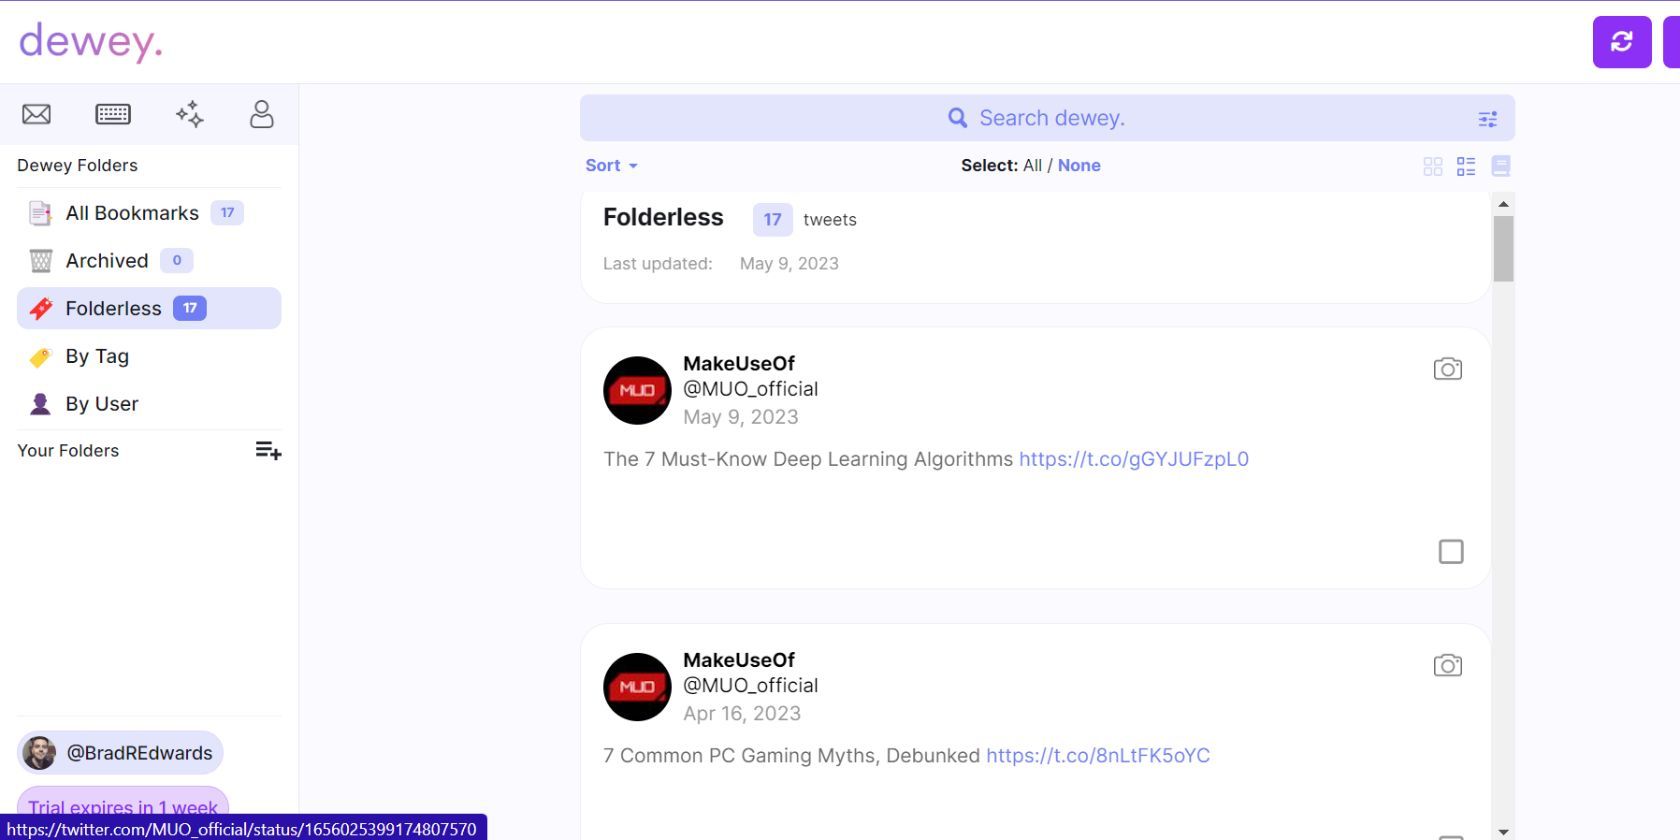 A screenshot of the Dewey dashboard showing a users bookmarked tweets